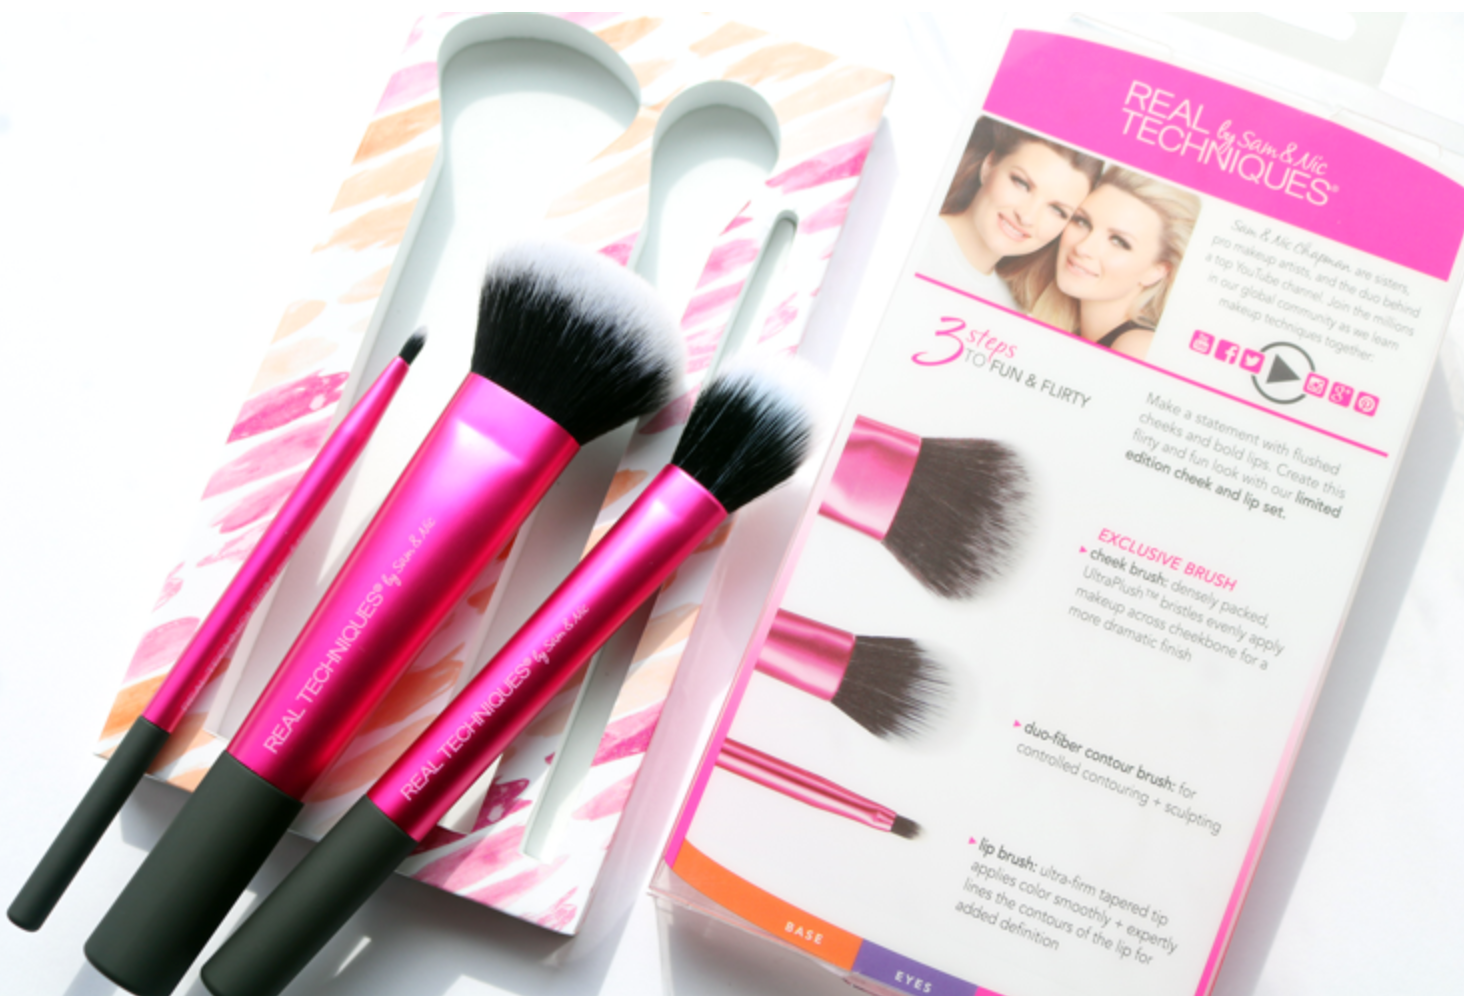 Real Techniques - Cheek & lip set limited edition